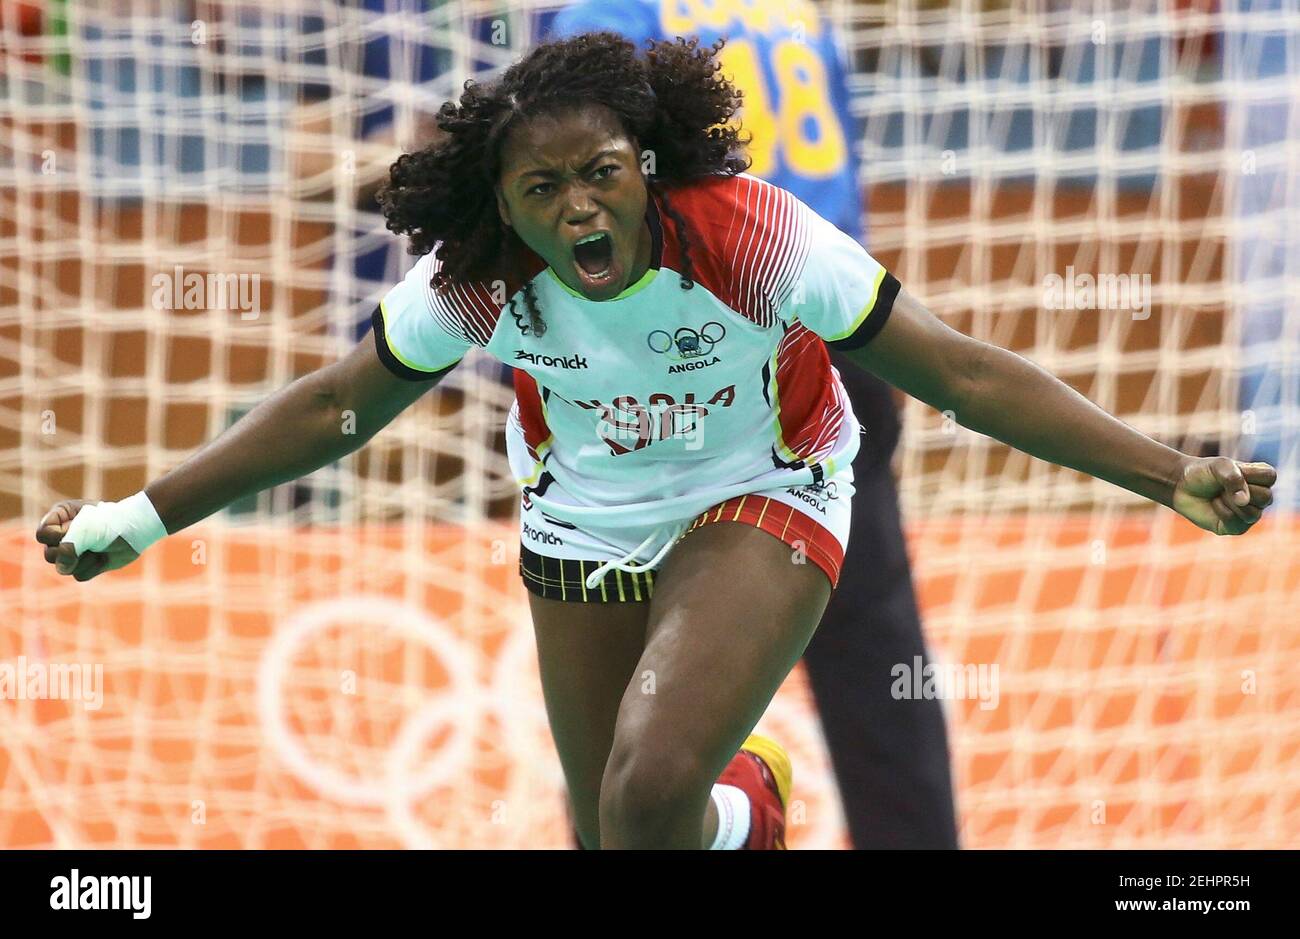 2016 Rio Olympics - Handball - Preliminary - Women's Preliminary Group A Spain v Angola - Future Arena - Rio de Janeiro, Brazil - 14/08/2016. Isabel Guialo (ANG) of Angola celebrates. REUTERS/Damir Sagolj FOR EDITORIAL USE ONLY. NOT FOR SALE FOR MARKETING OR ADVERTISING CAMPAIGNS.     Picture Supplied by Action Images Stock Photo